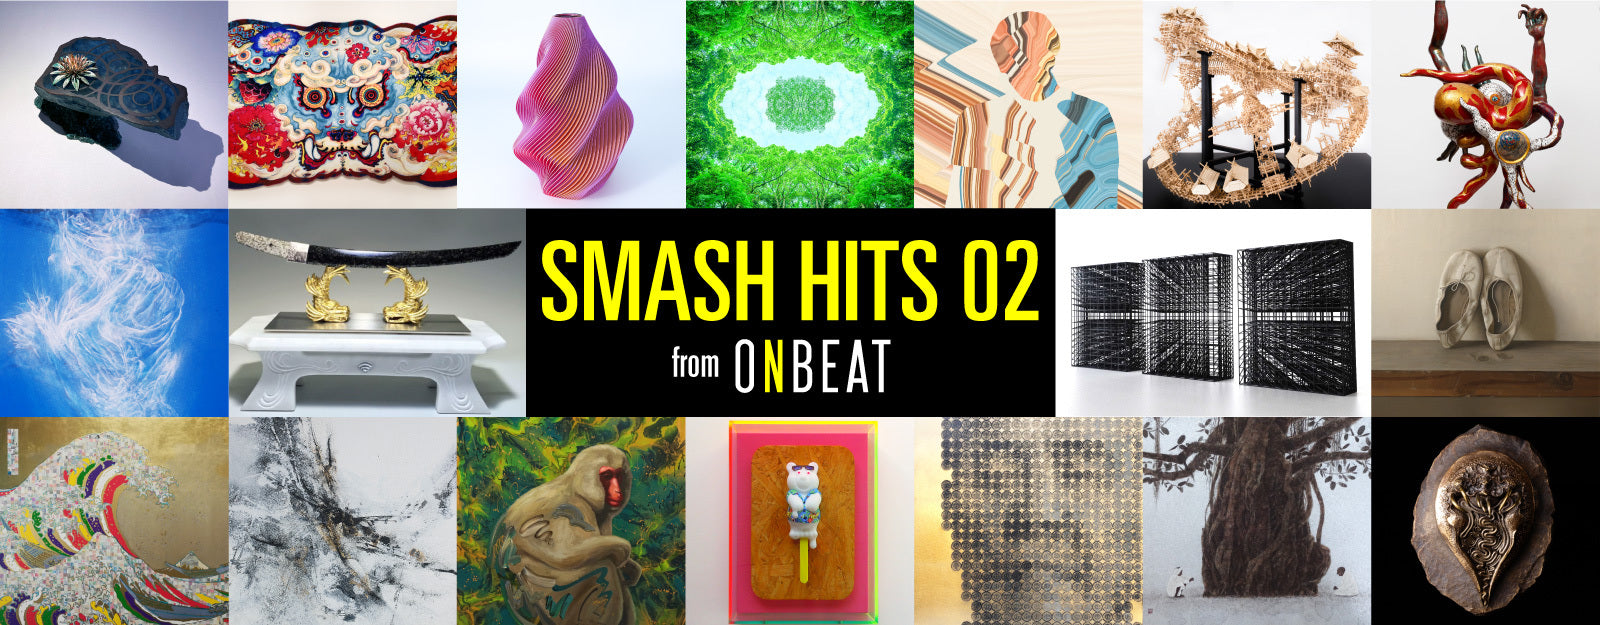 “Smash Hits 02” from ONBEAT